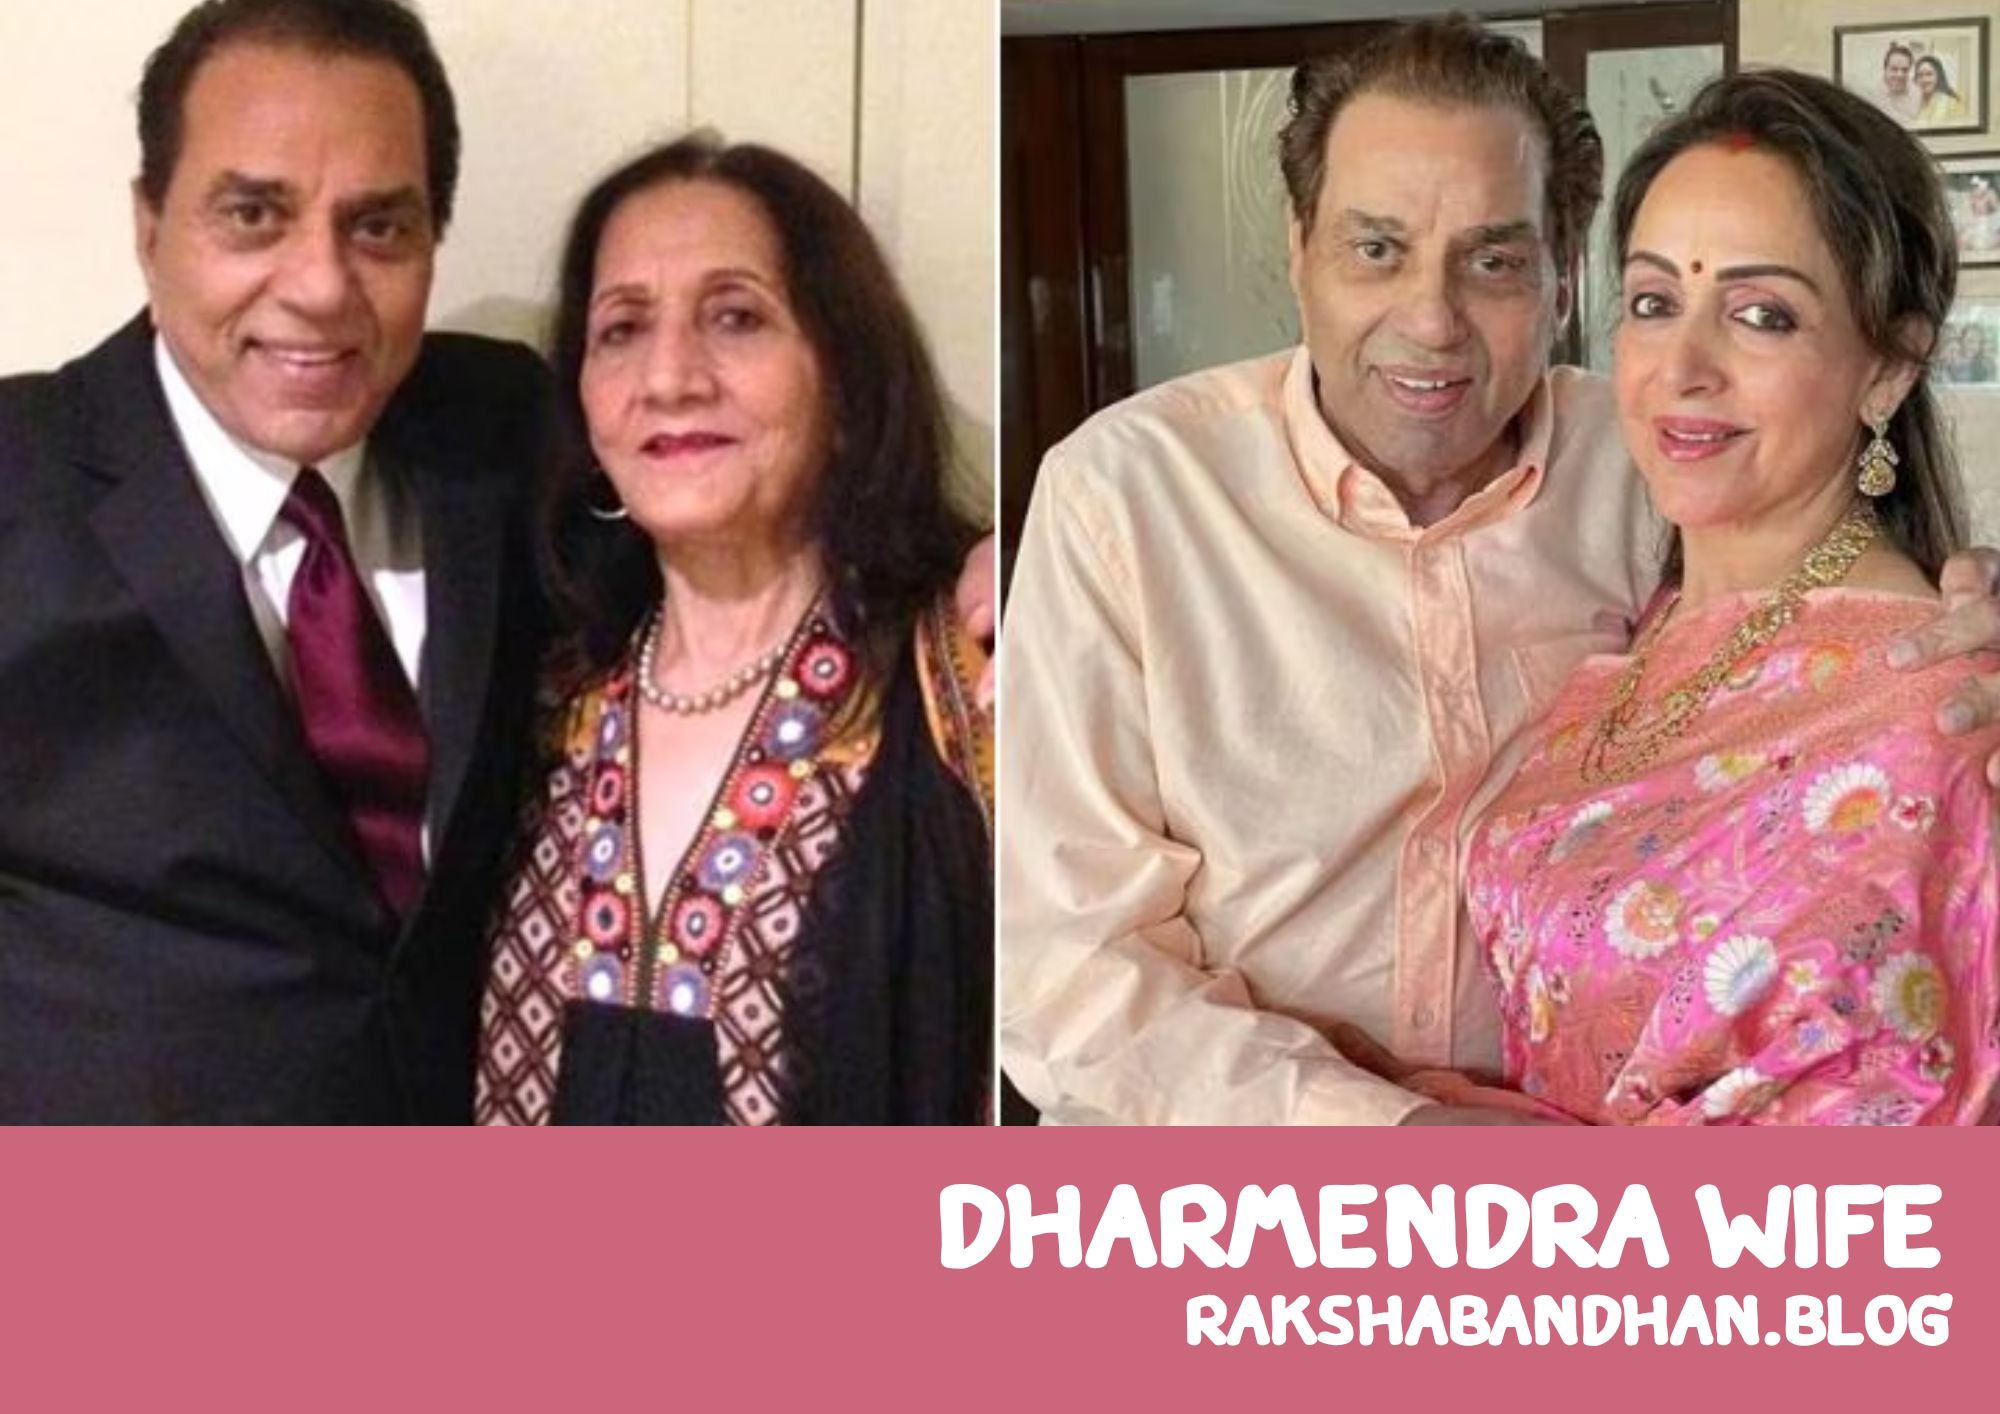 Dharmendra Wife Name - Who Is Dharmendra First Wife And Second Wife?